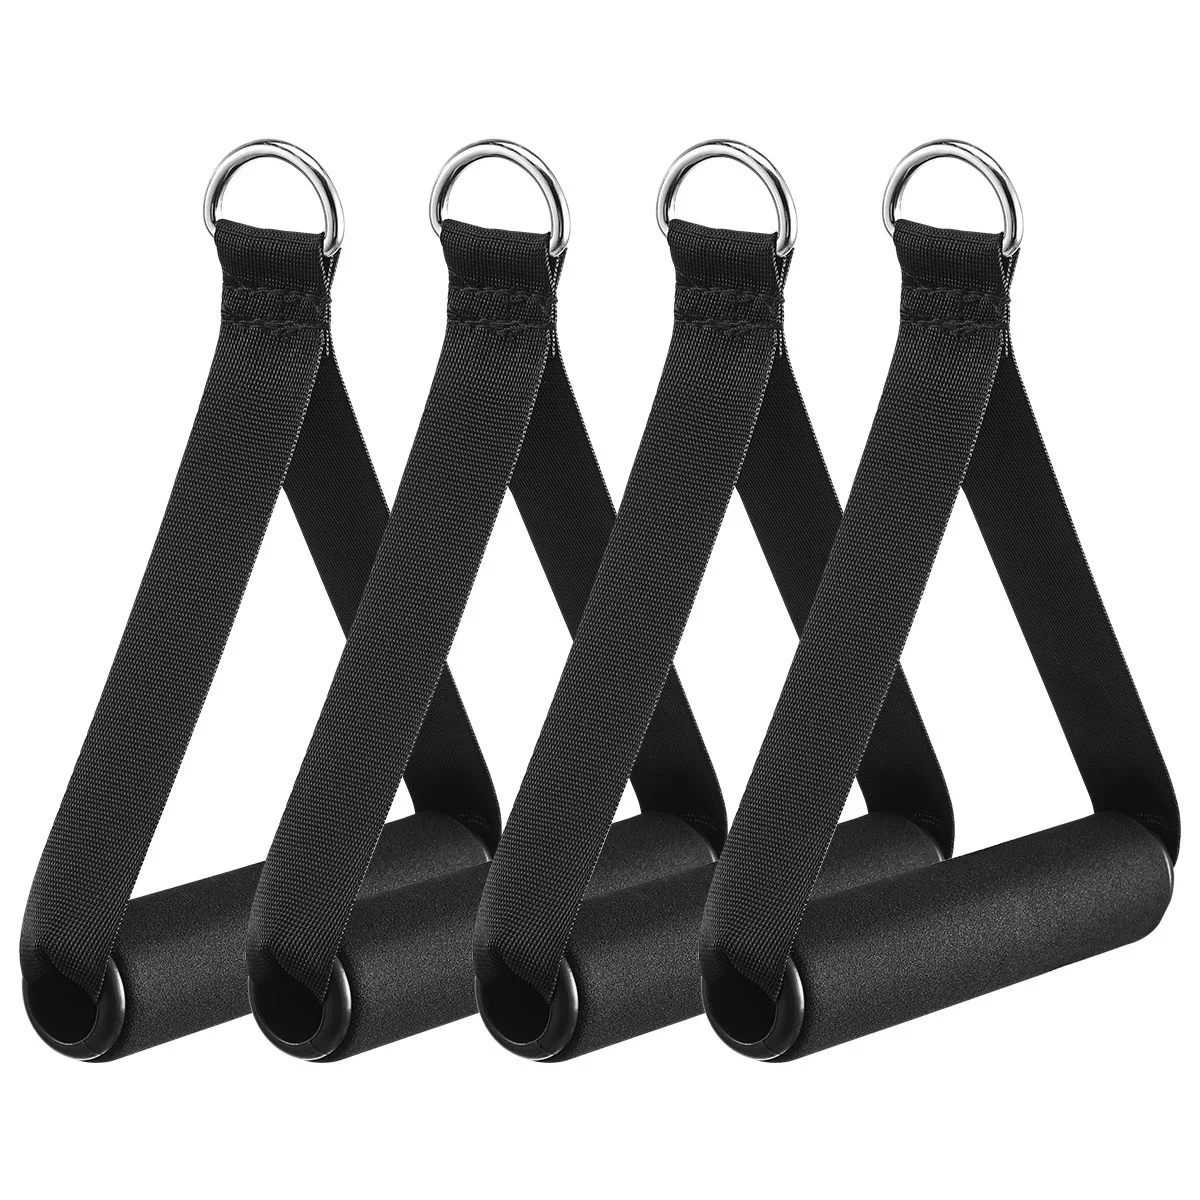 

2pcs GARNECK 4Pcs Single-Grip Handles with Carabiner Clips Pull Handle Exercise Handles for Resistance Tube Exercise Strength